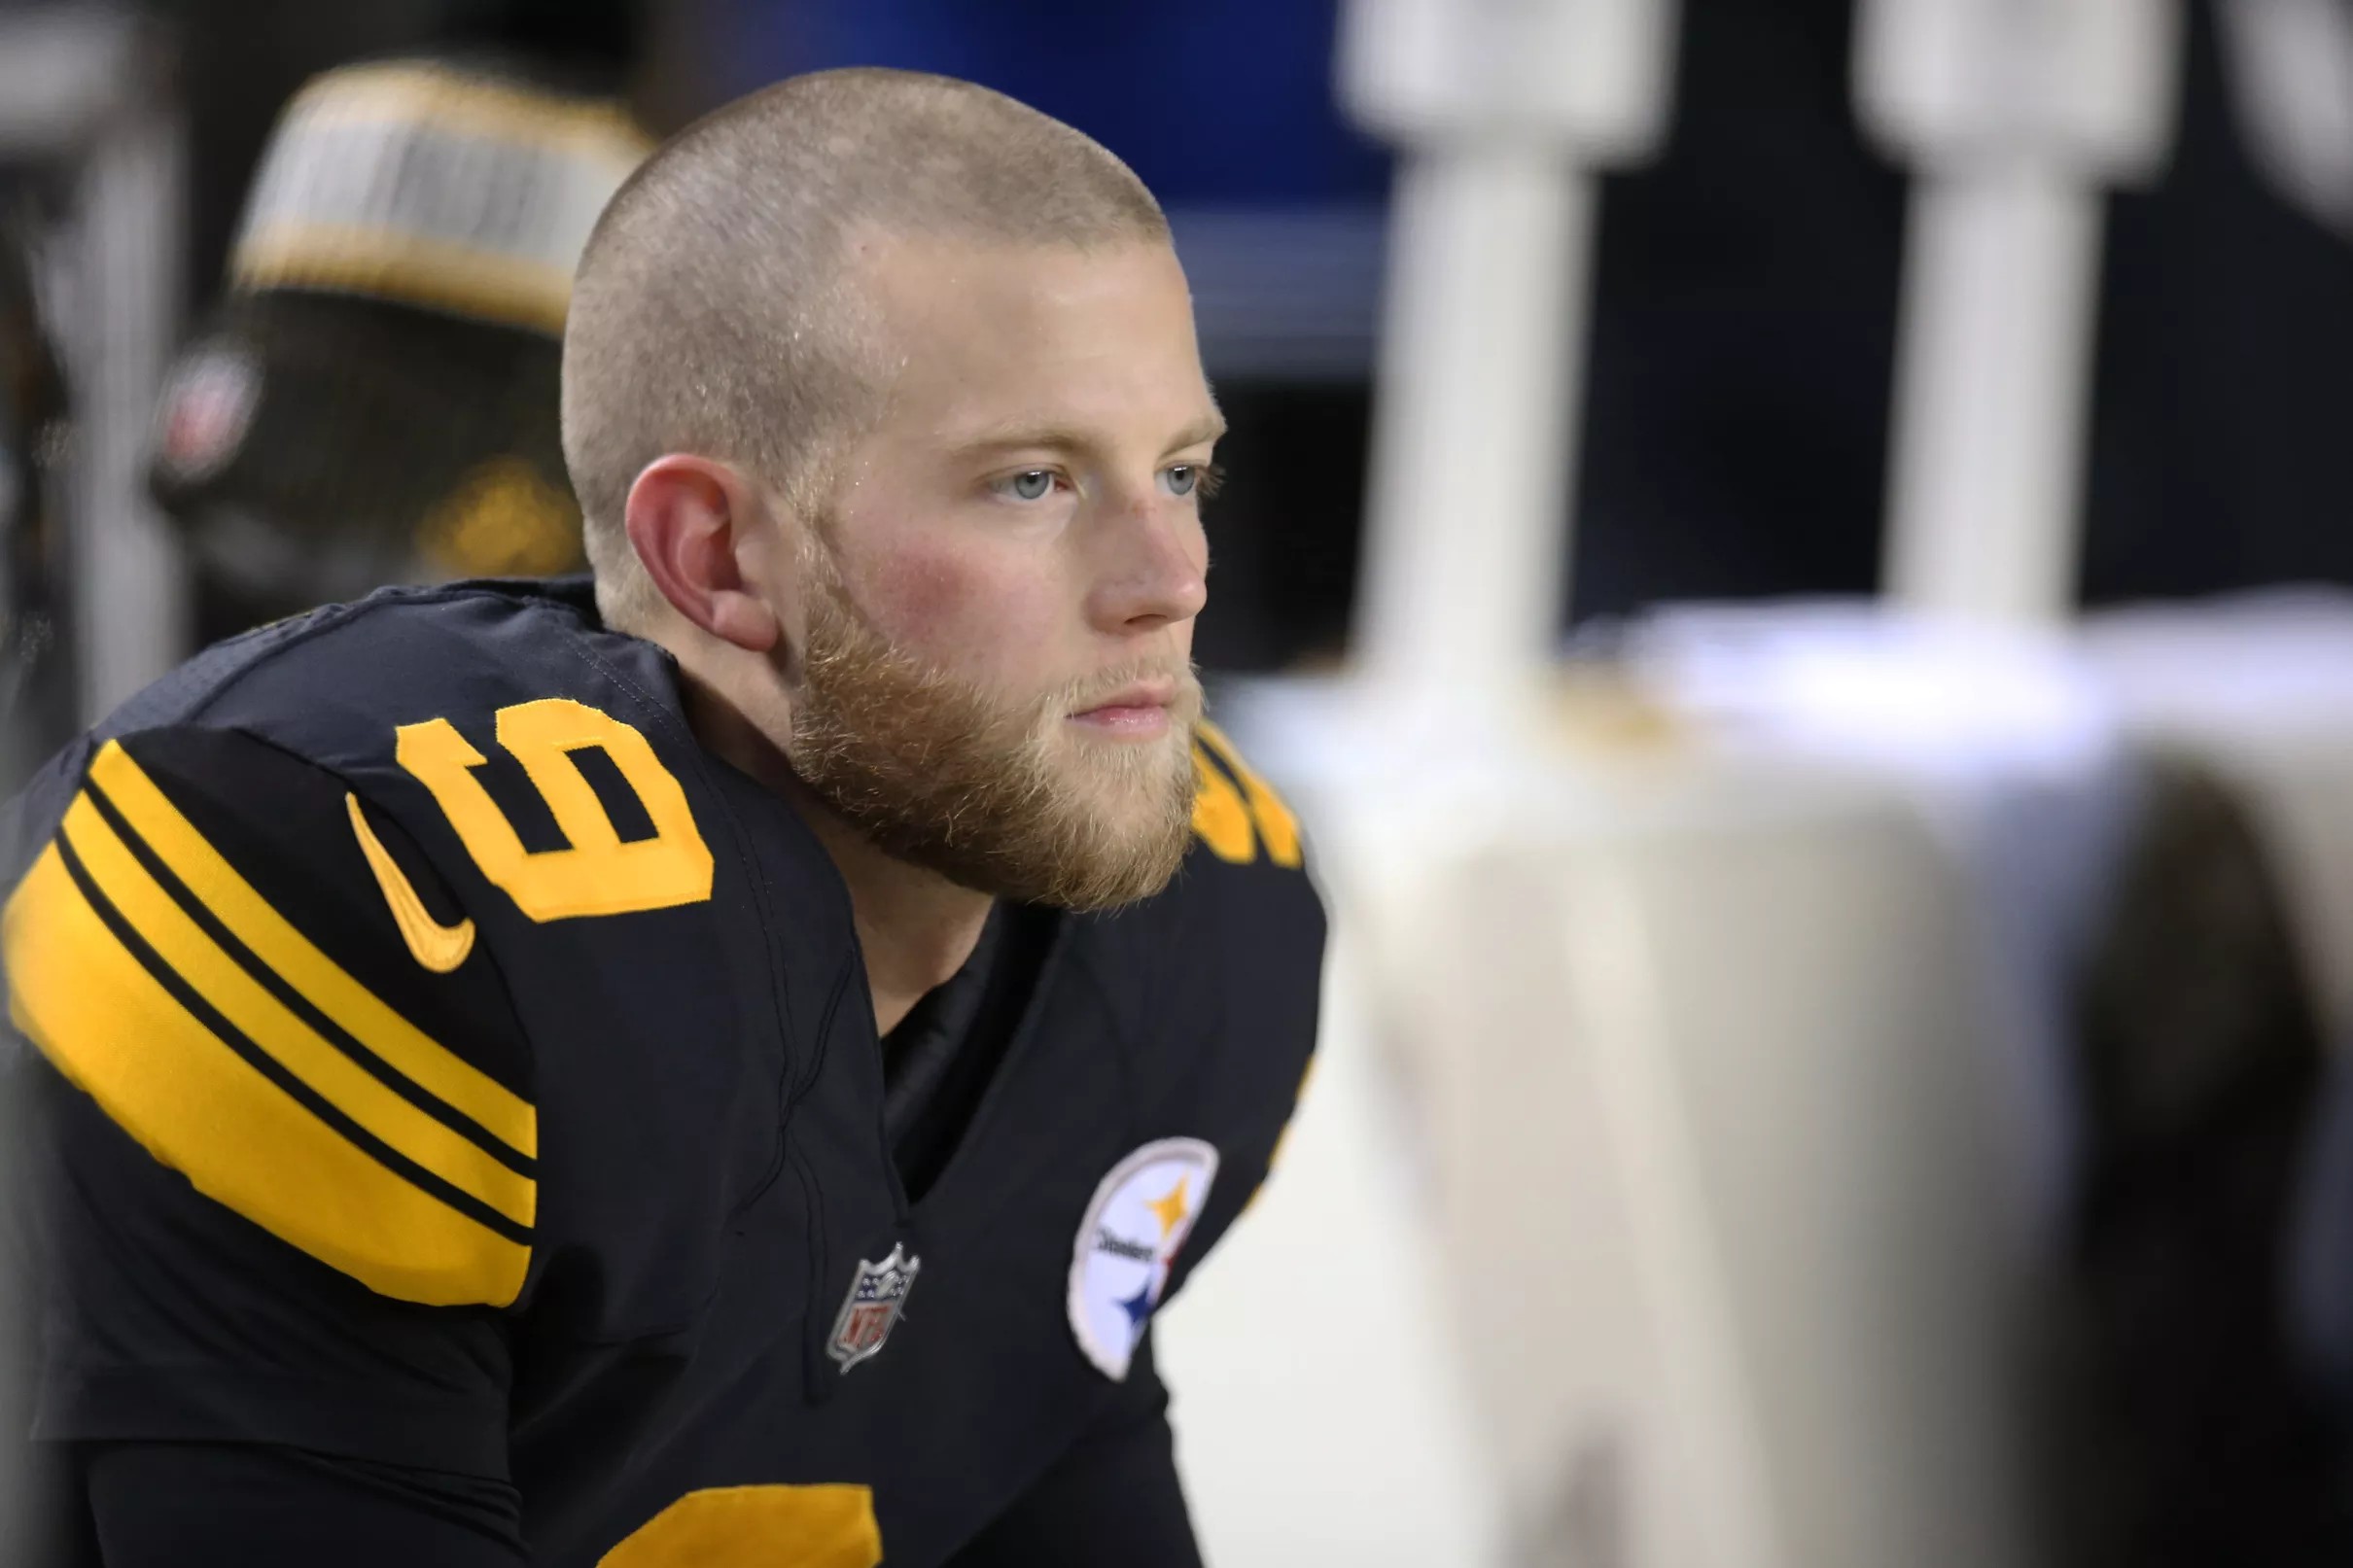 Chris Boswell The reason the Steelers didn’t make the